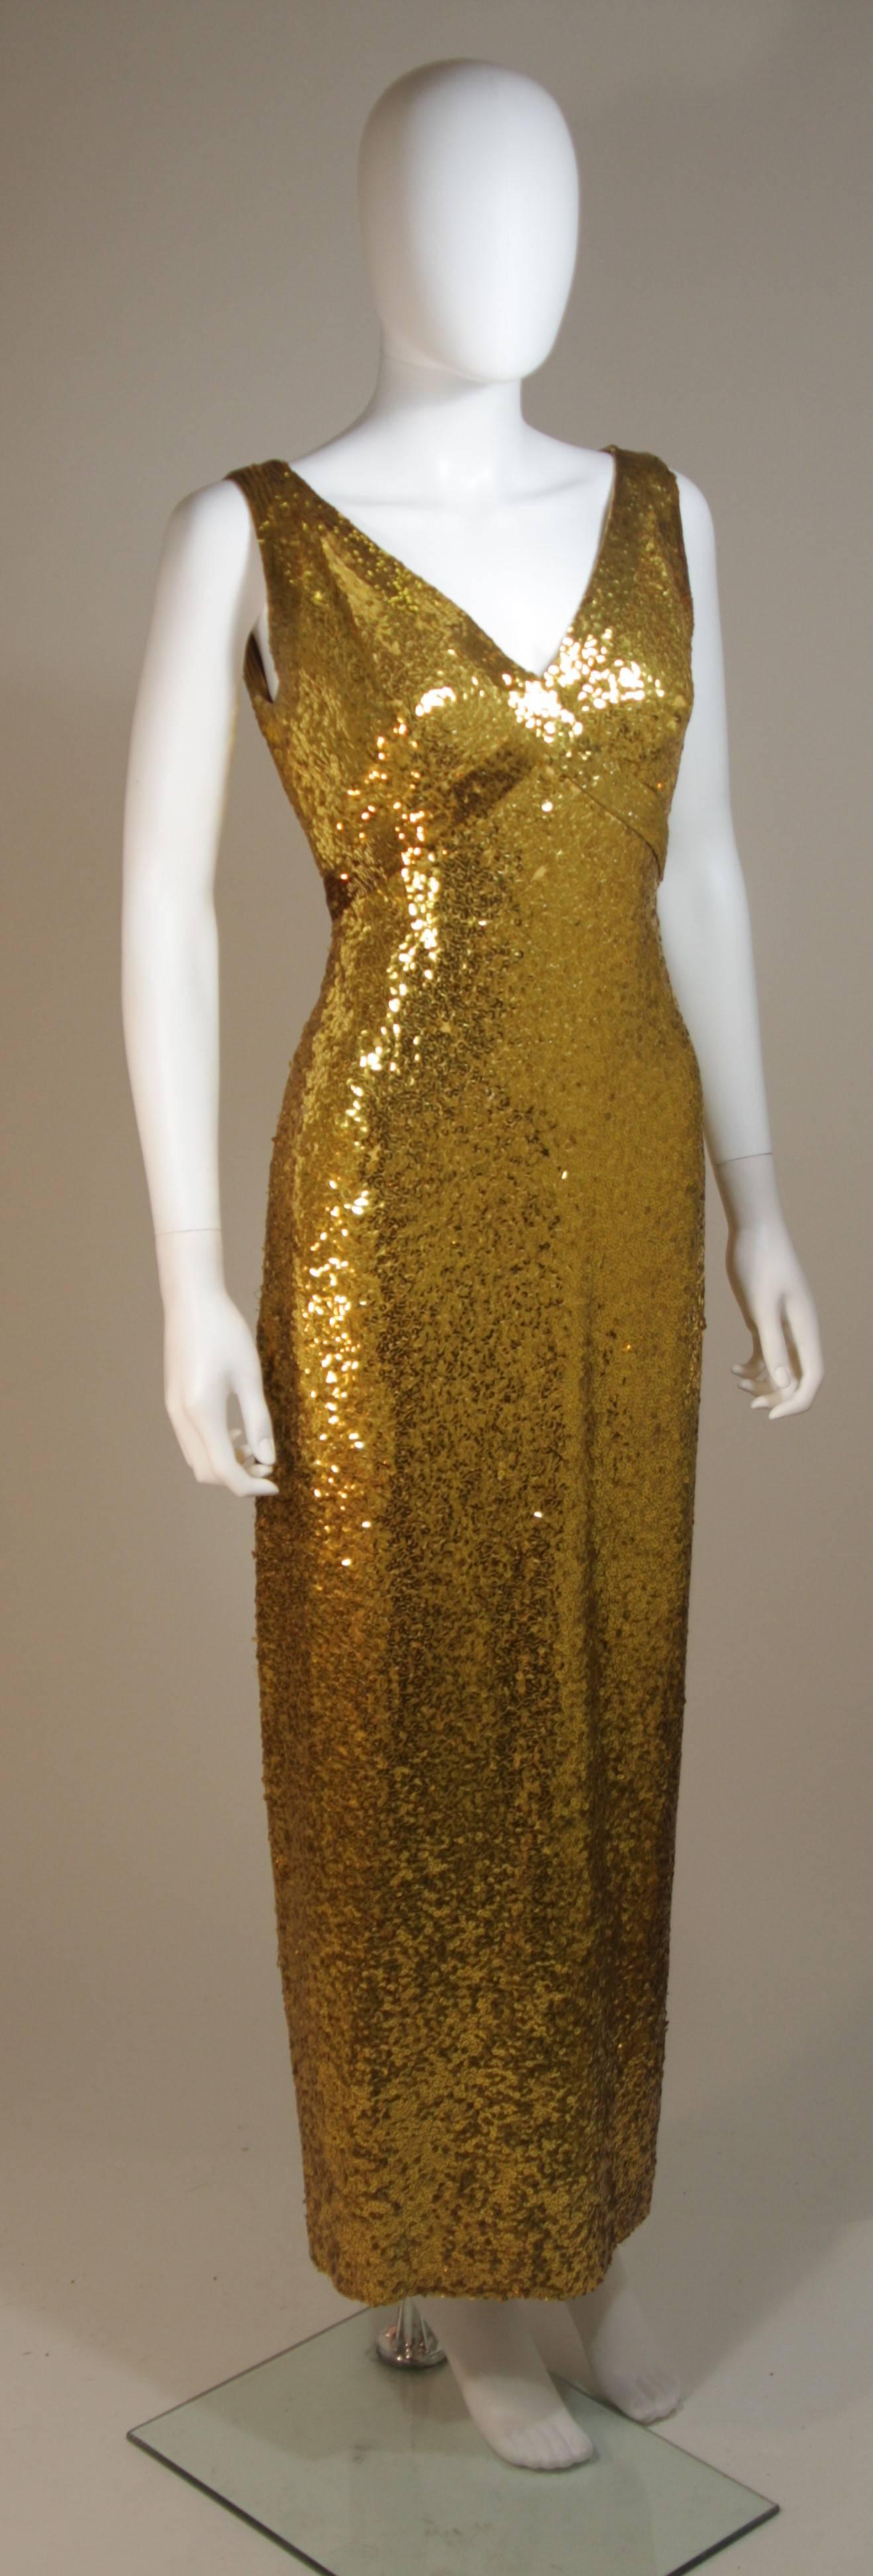 Brown IRENE SARGENT Gold Sequin Gown with Empire Bust Size 6-8 For Sale